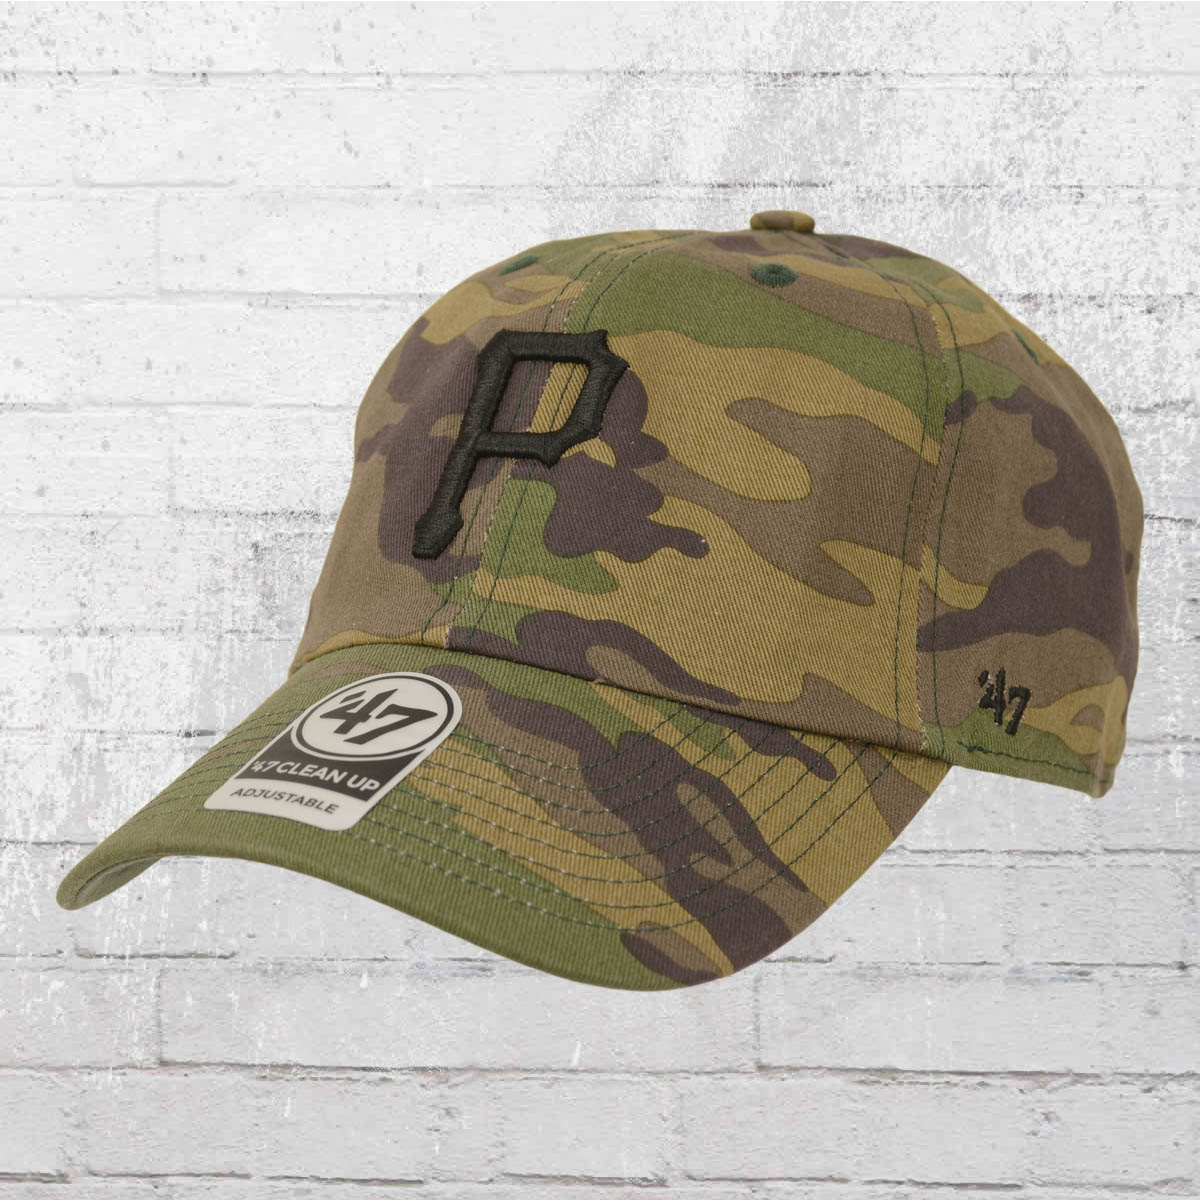 Order now | 47 Brands Clean Up Hat Pittsburgh Pirates MLB Cap camouflage